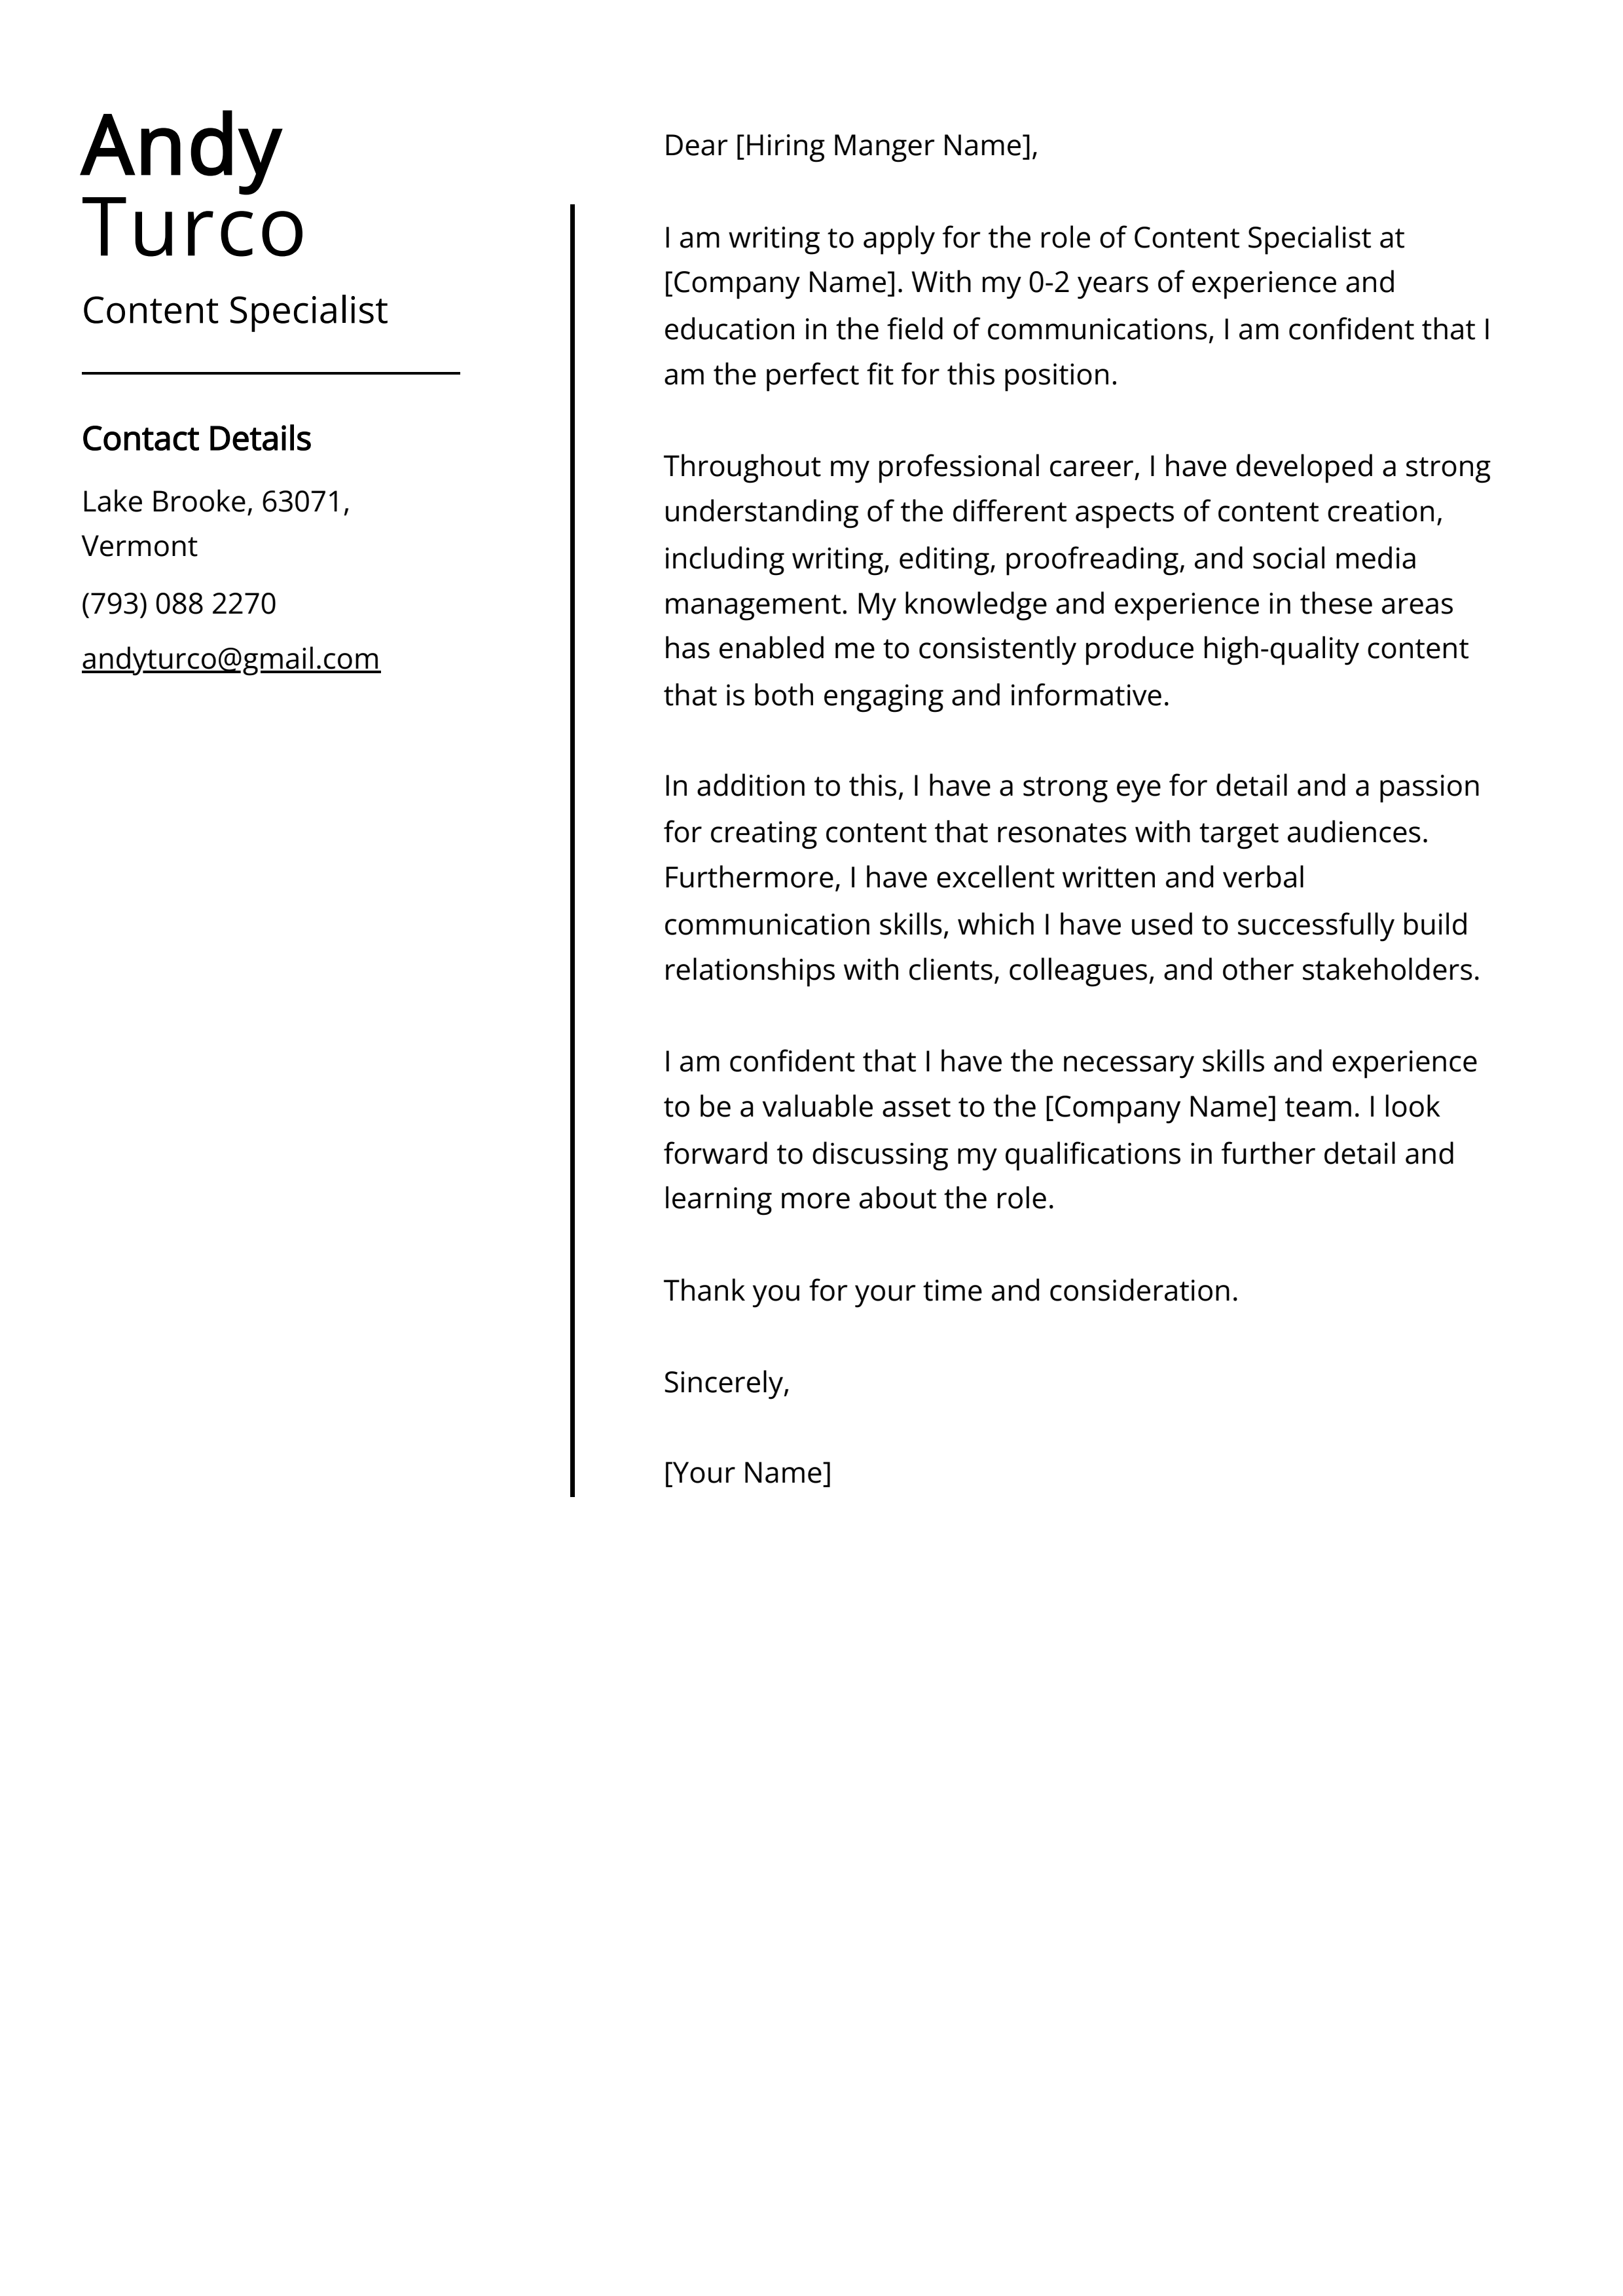 Content Specialist Cover Letter Example